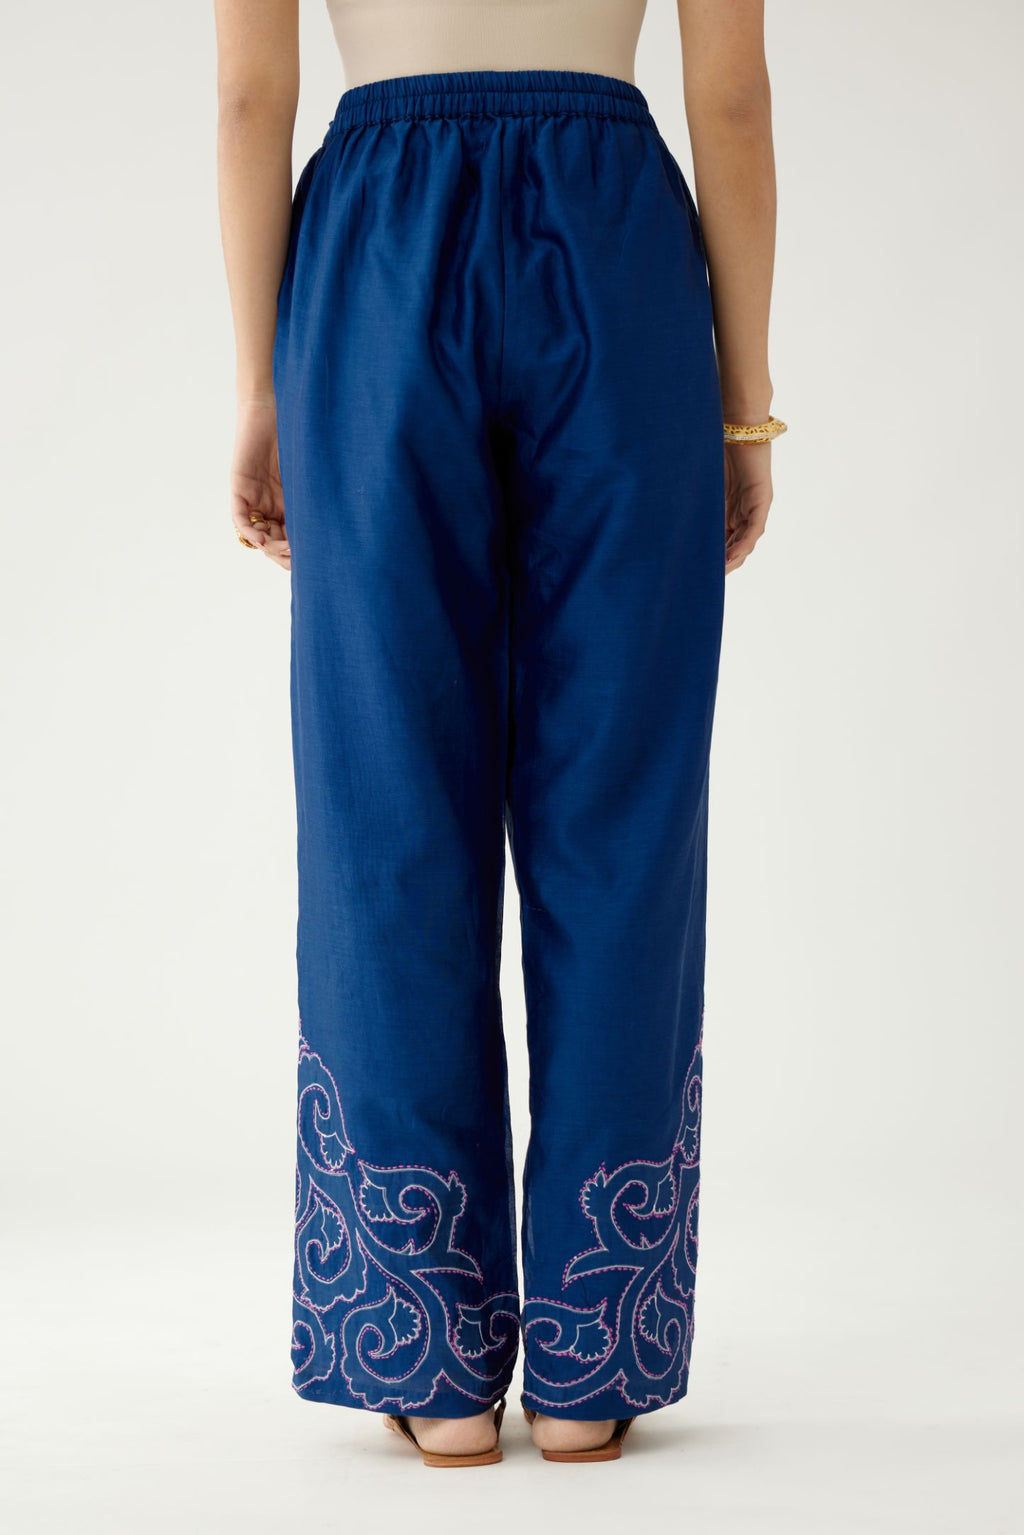 Blue silk chanderi straight pants with cotton appliqué jaal work at reverse side, highlighted with kantha work in front side at bottom hem.